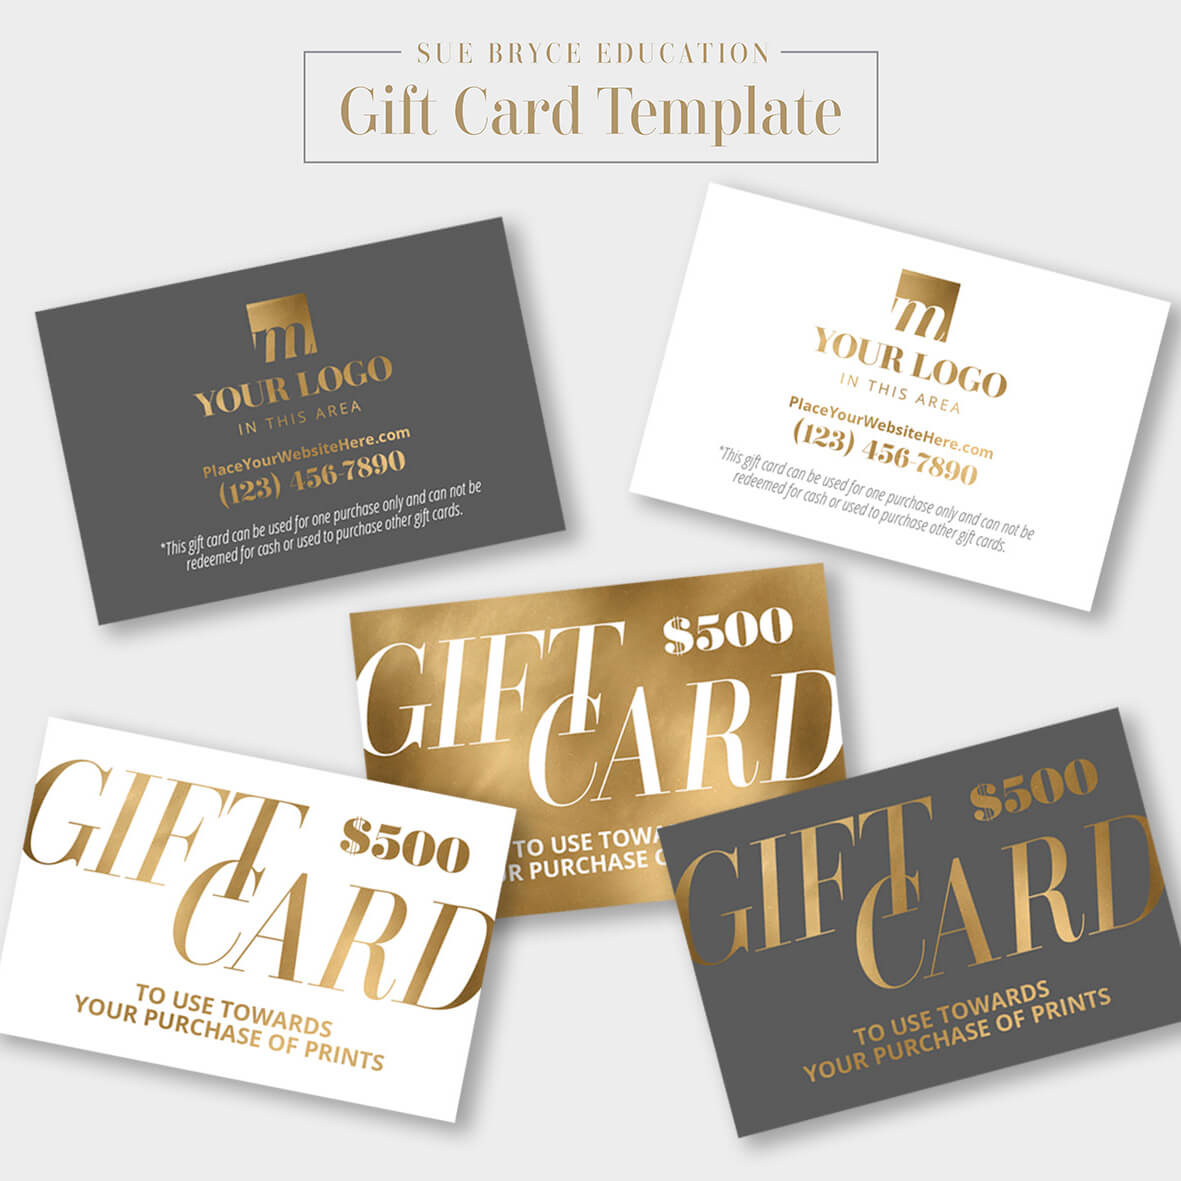 Gift Certificate Templates Indesign Illustrator Gift Coupon Regarding Gift Certificate Template Indesign